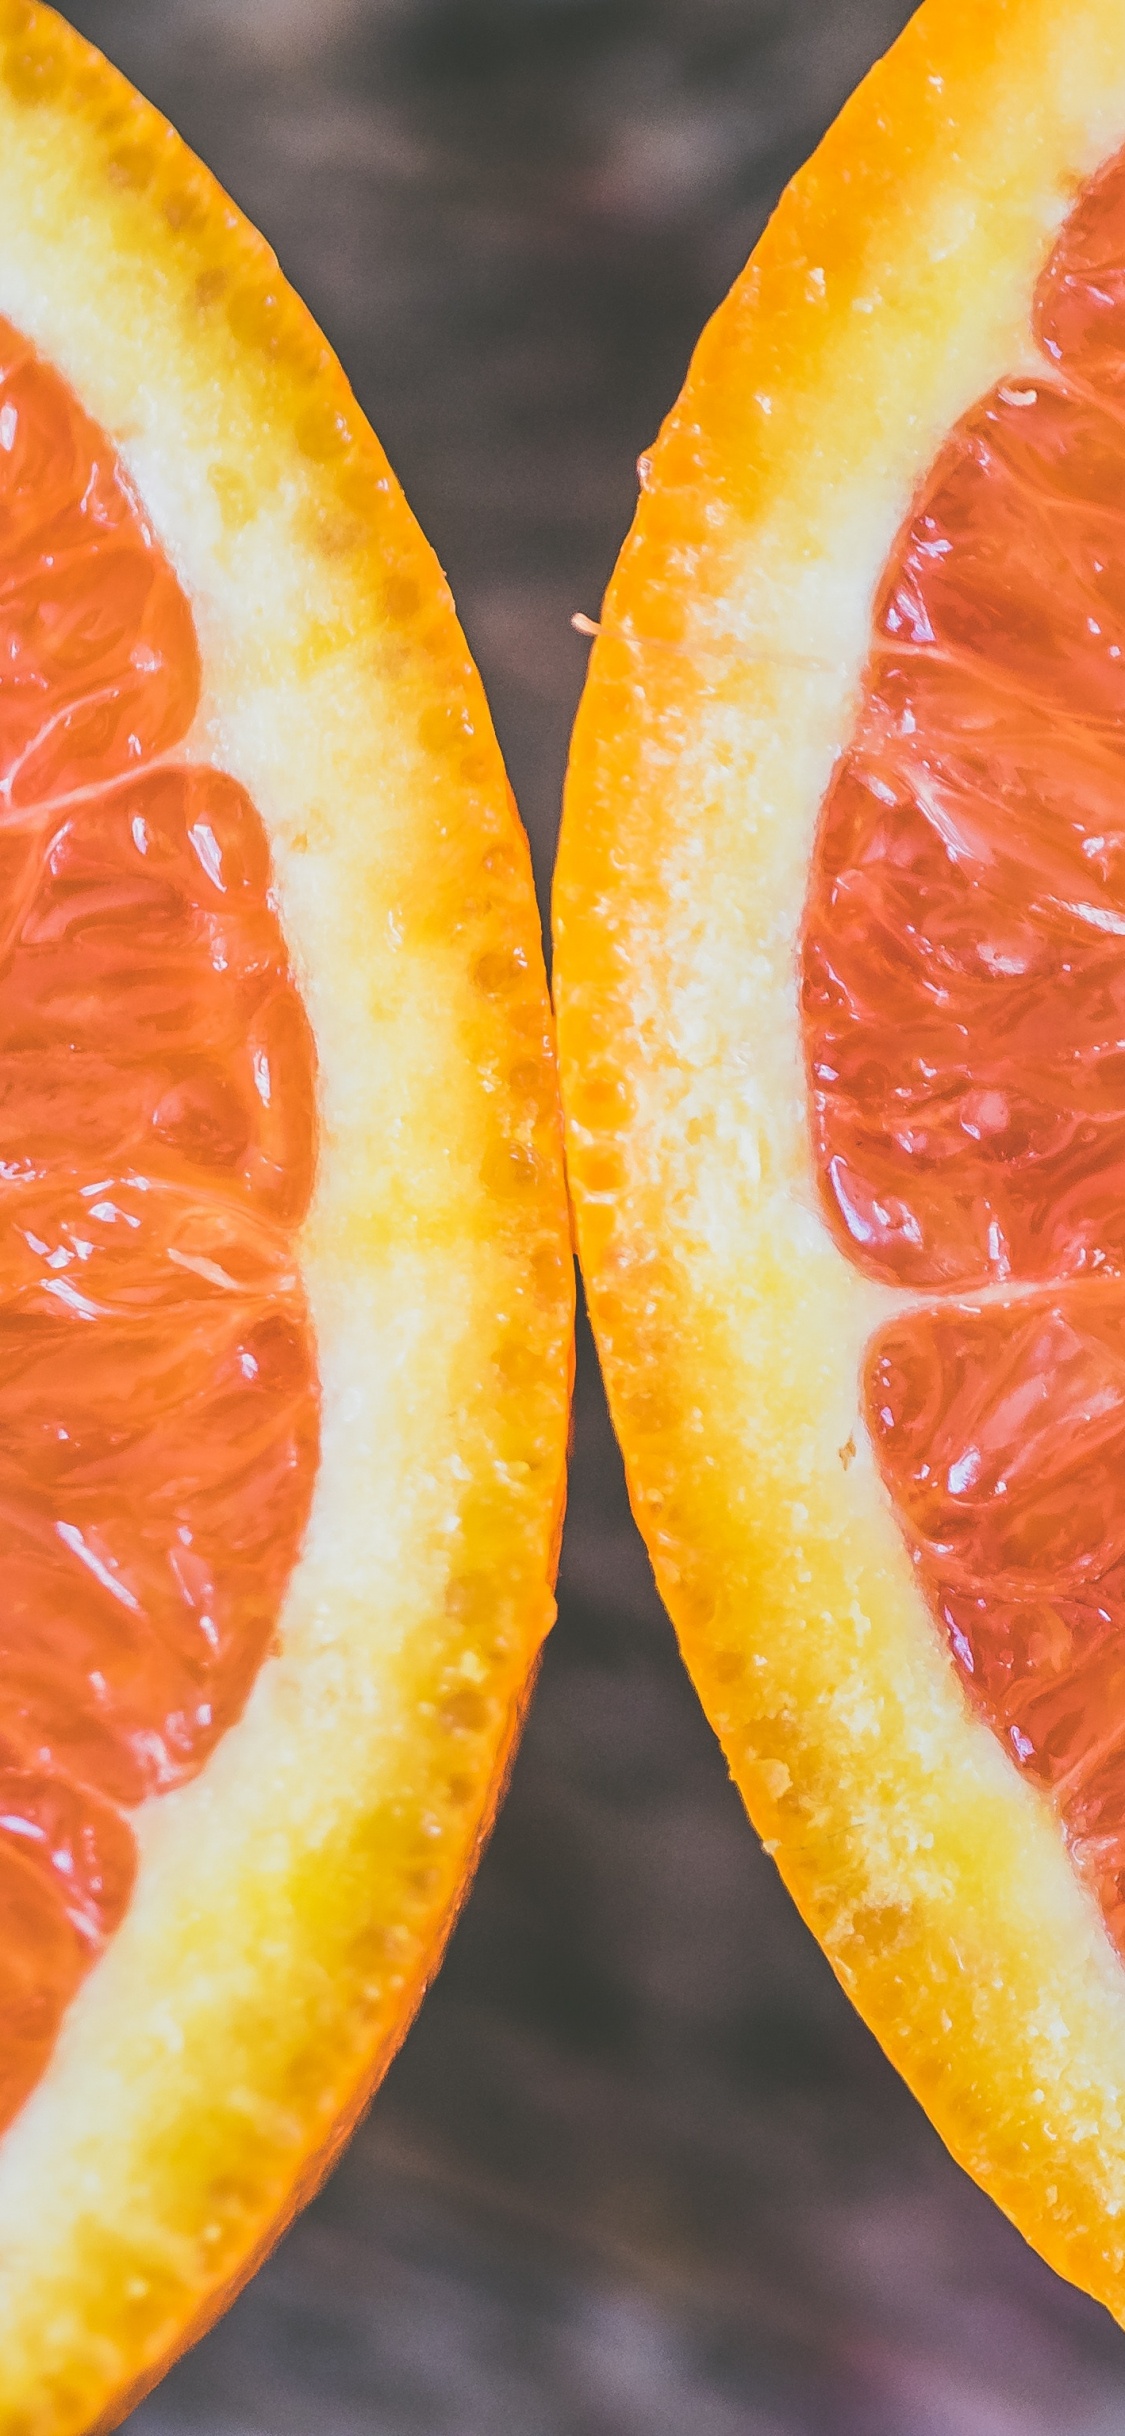 Sliced Orange Fruit in Close up Photography. Wallpaper in 1125x2436 Resolution